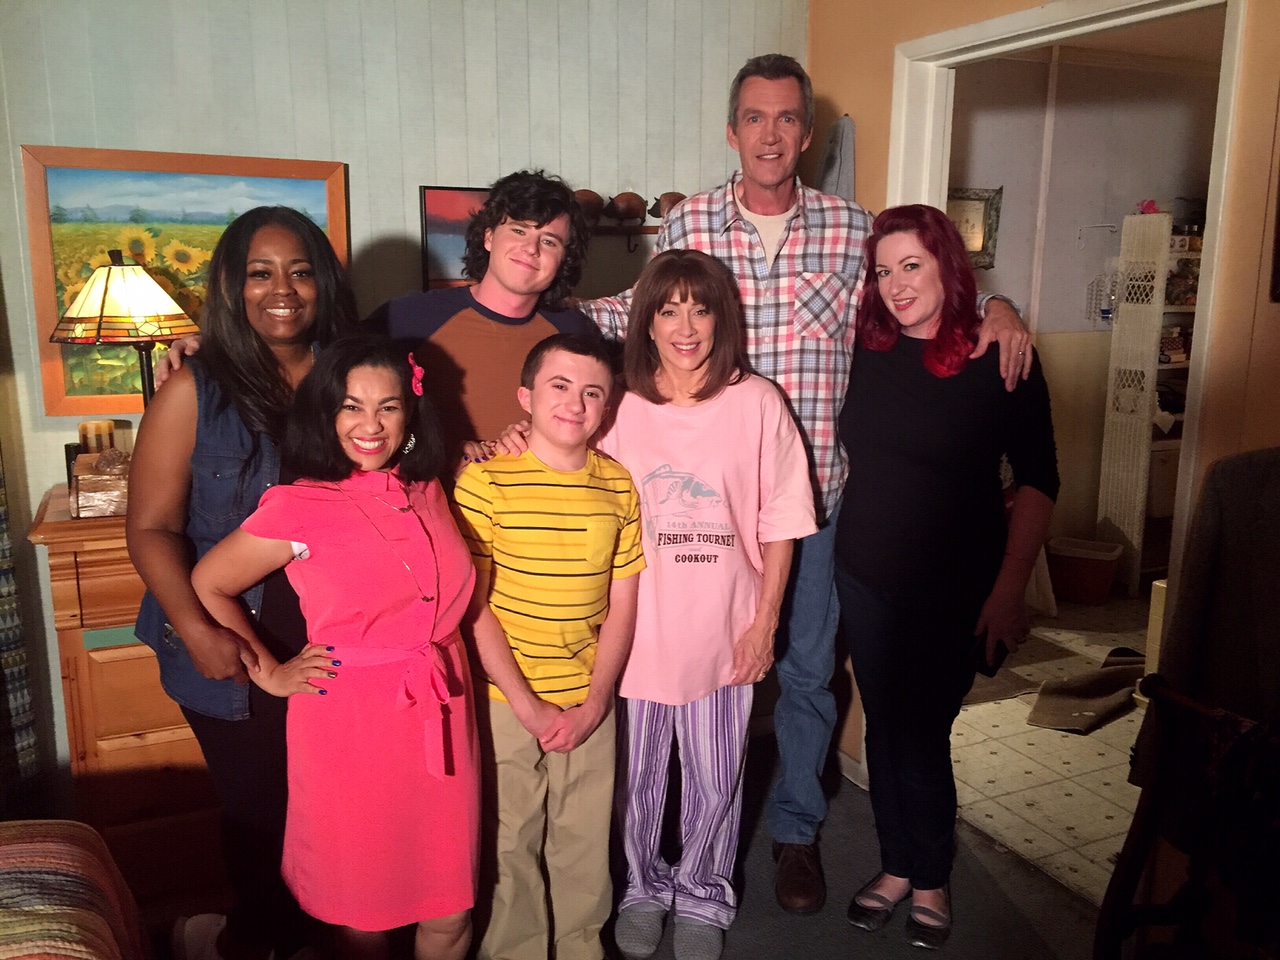 ‘The Middle’ Behind-The-Scenes Set Visit In Los Angeles